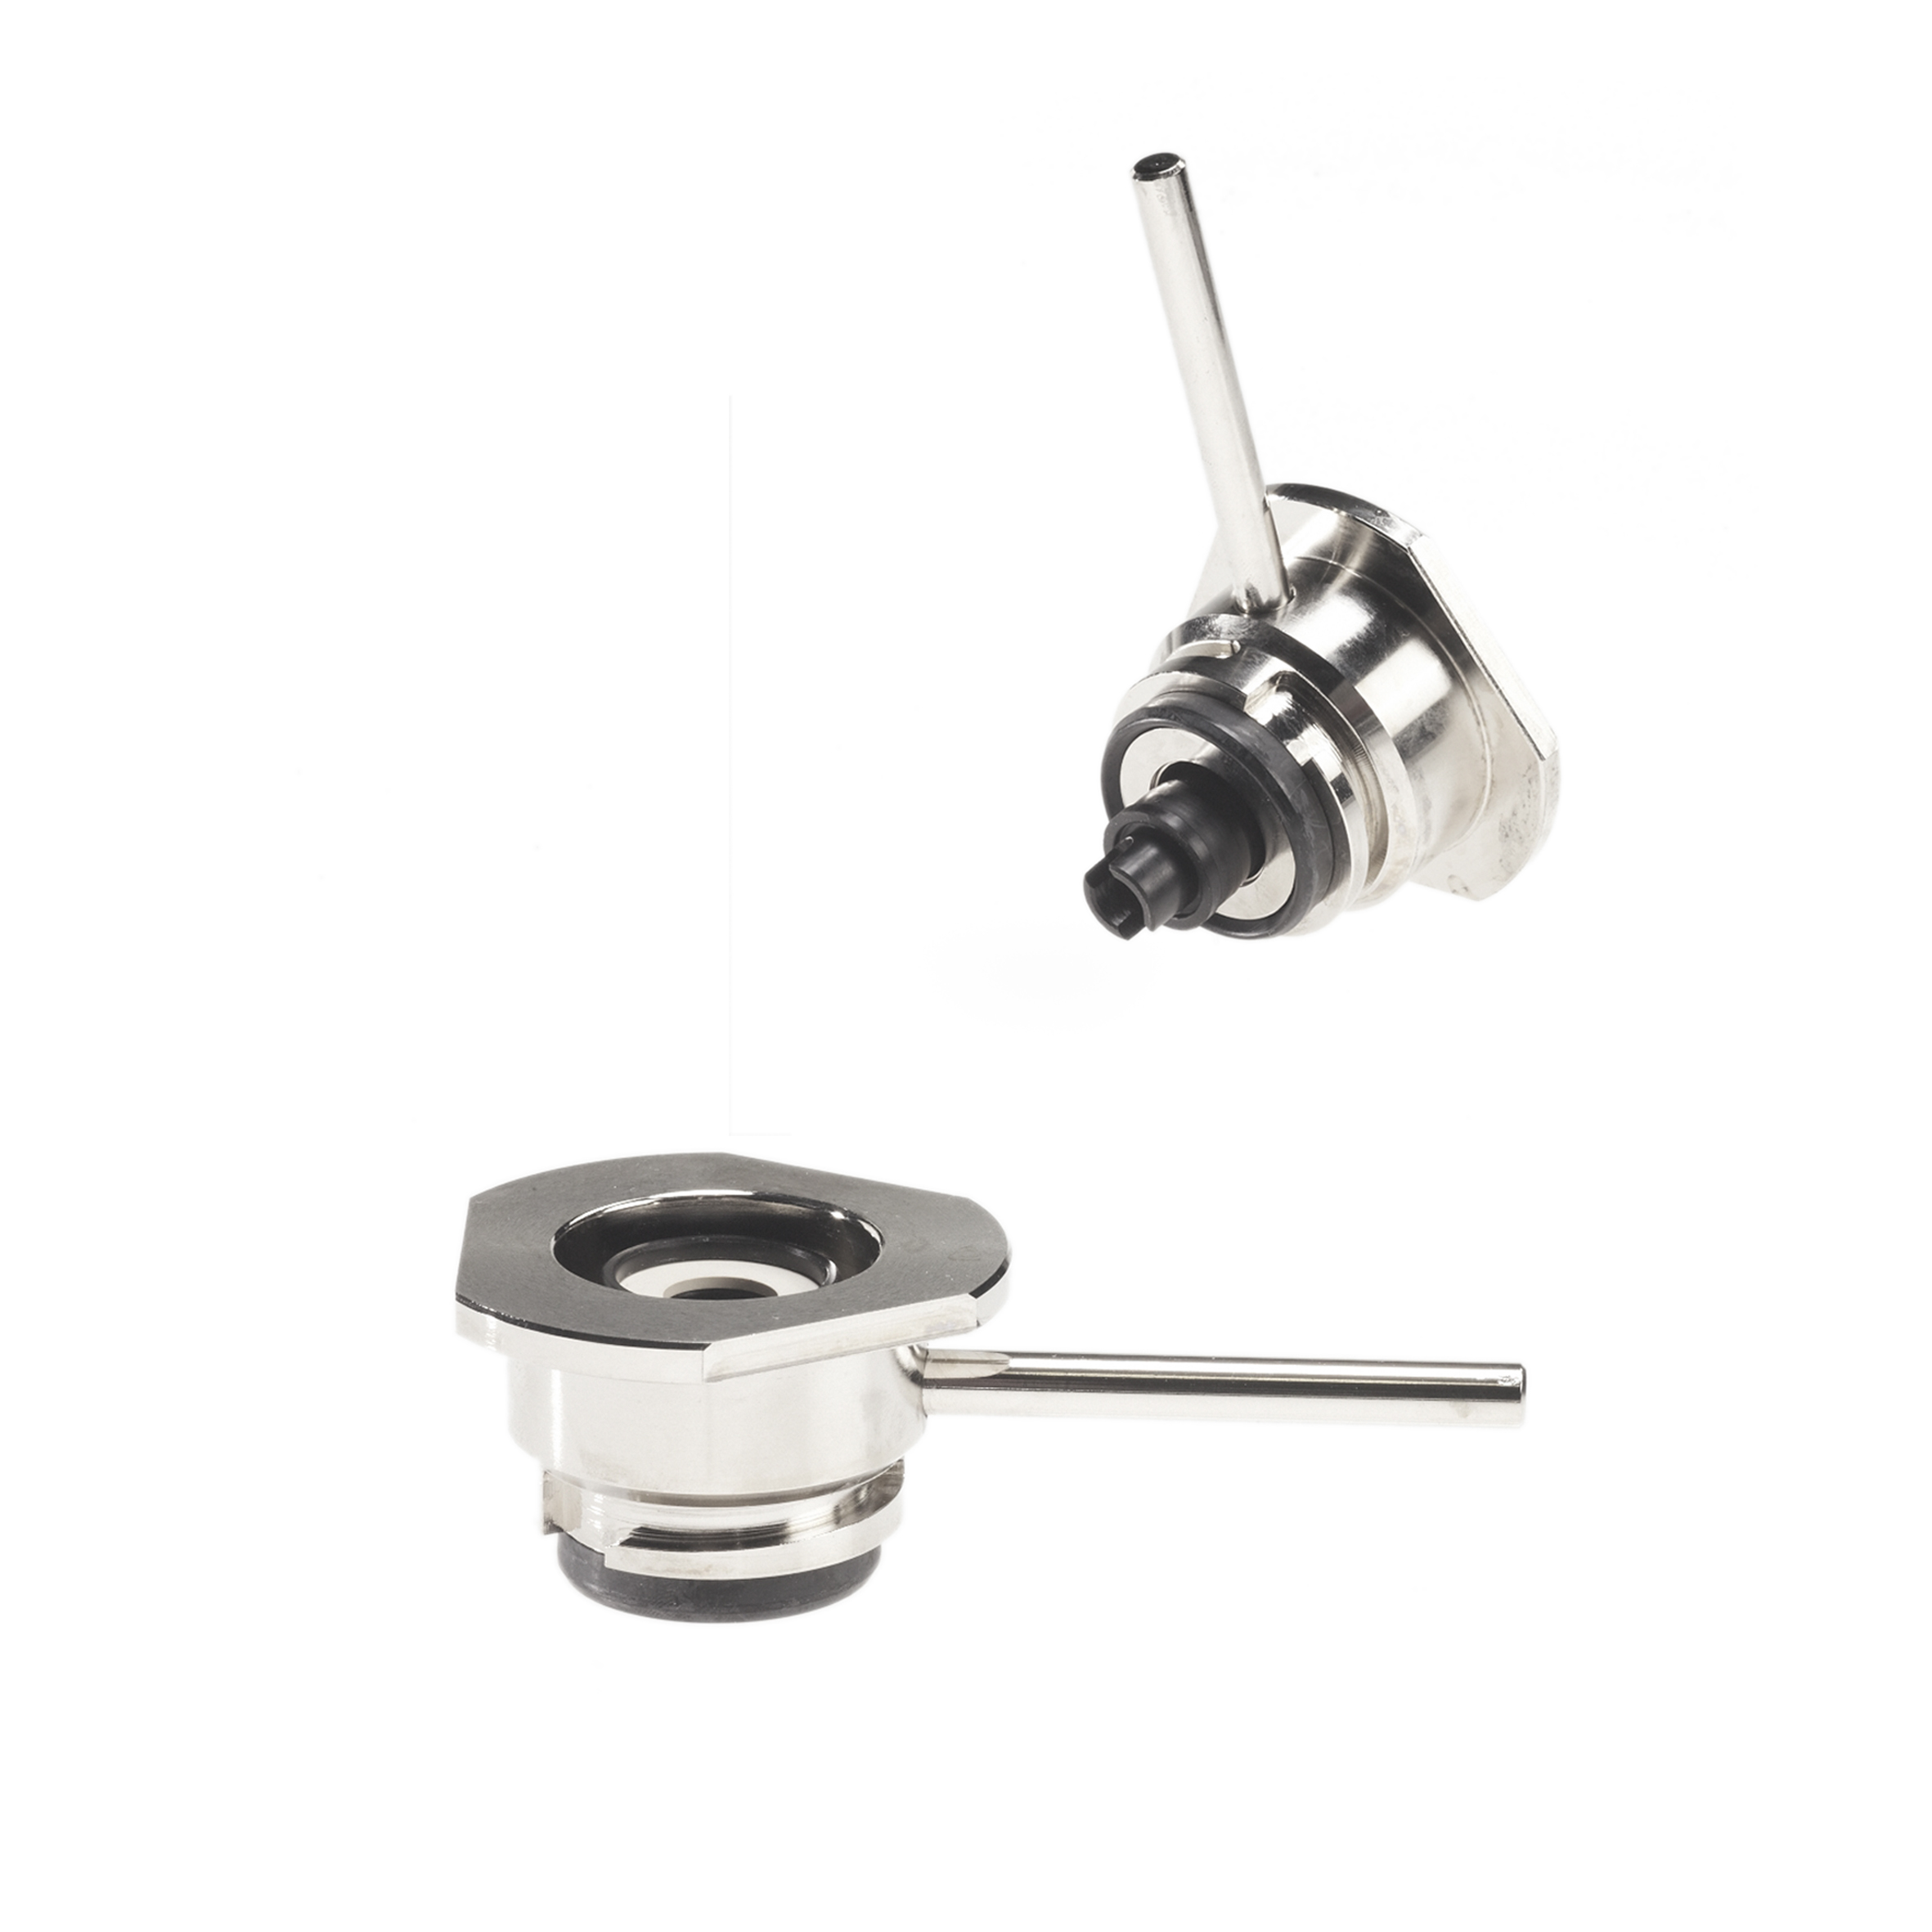 Details about   Key Keg to D Coupler/American Sanke Cleaning Adapter 